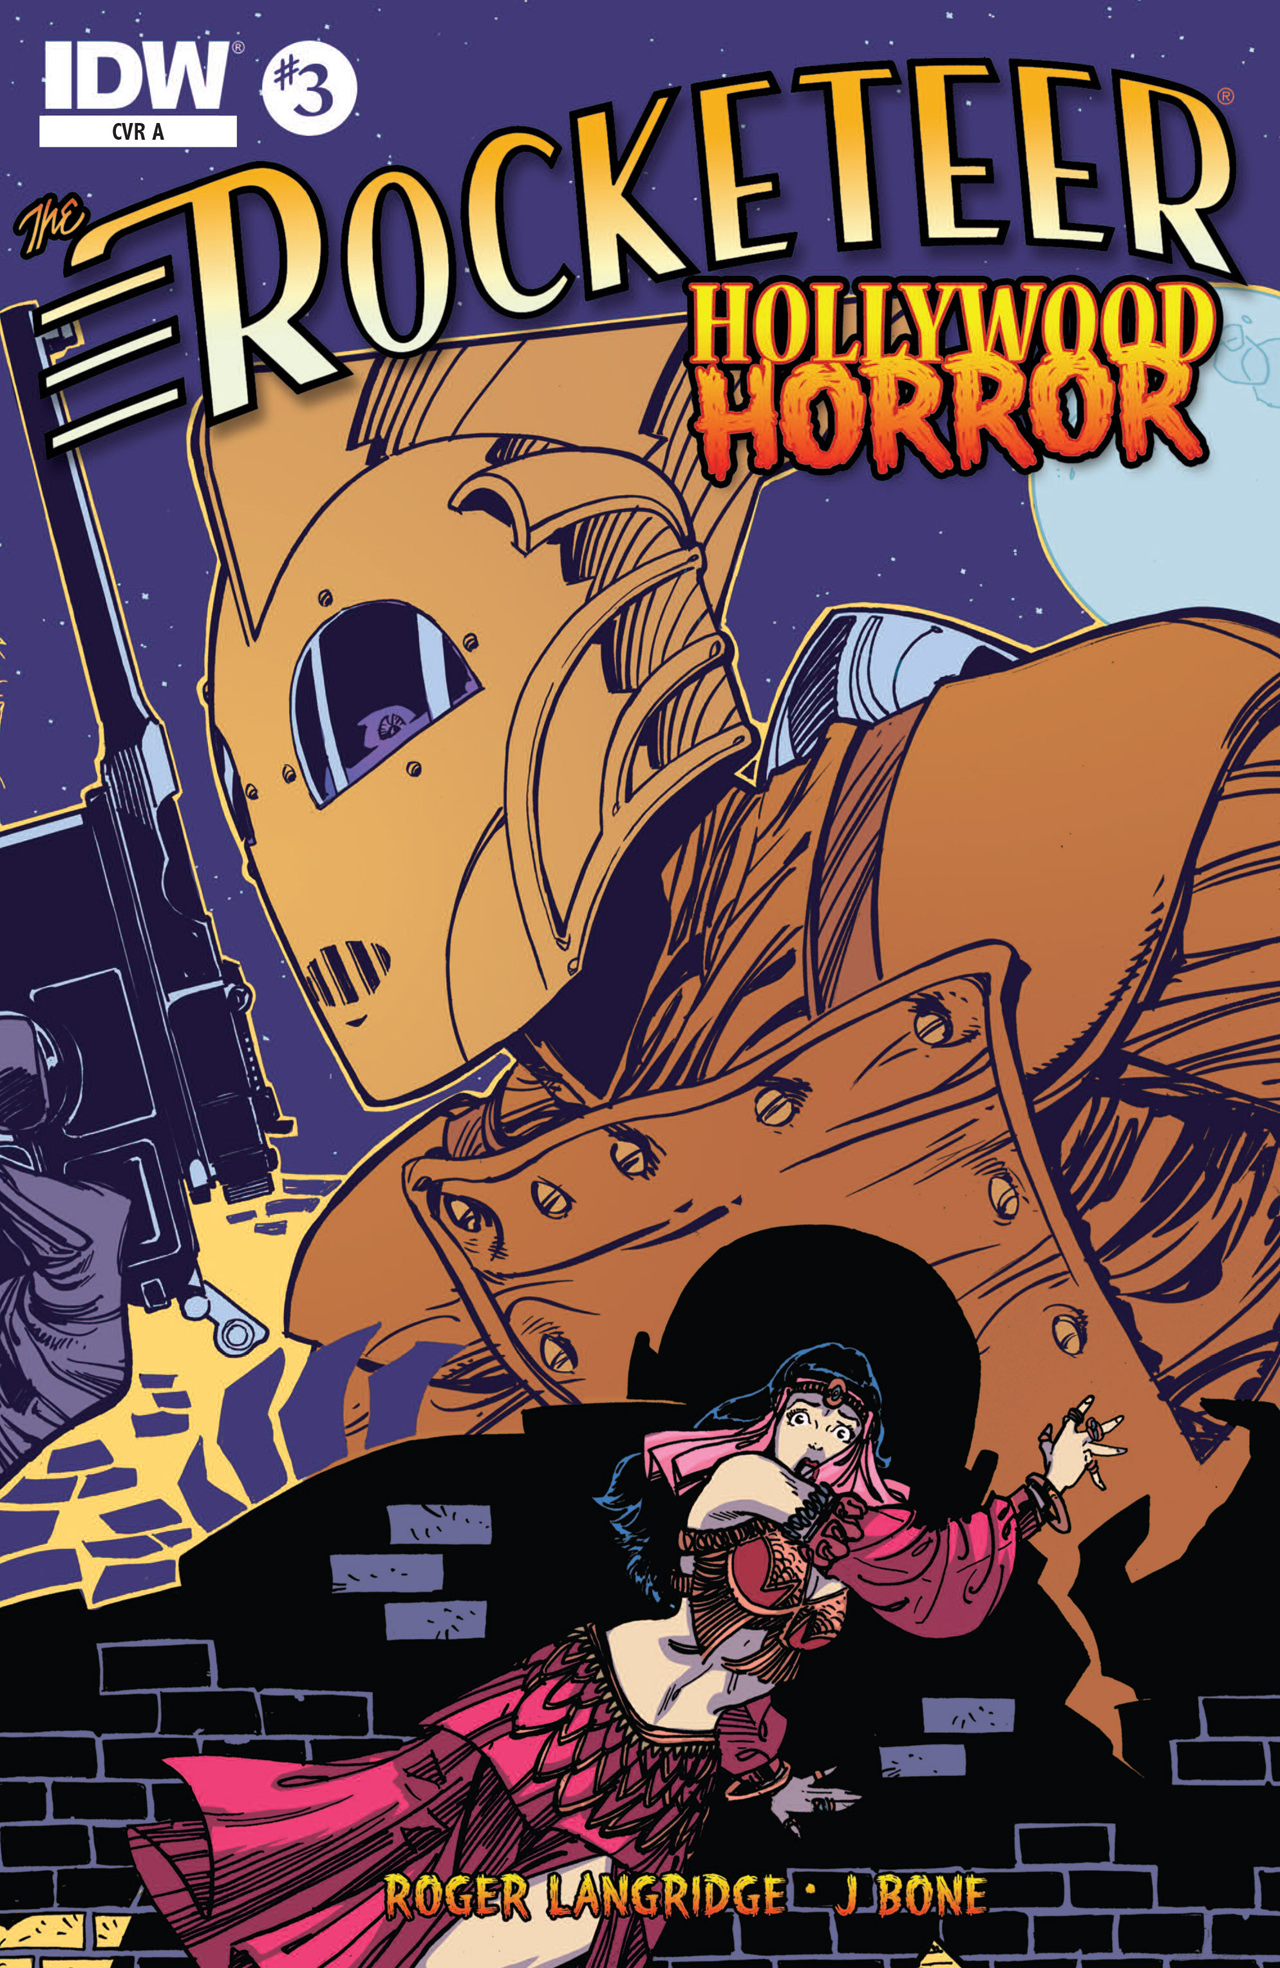 Read online The Rocketeer: Hollywood Horror comic -  Issue #3 - 1